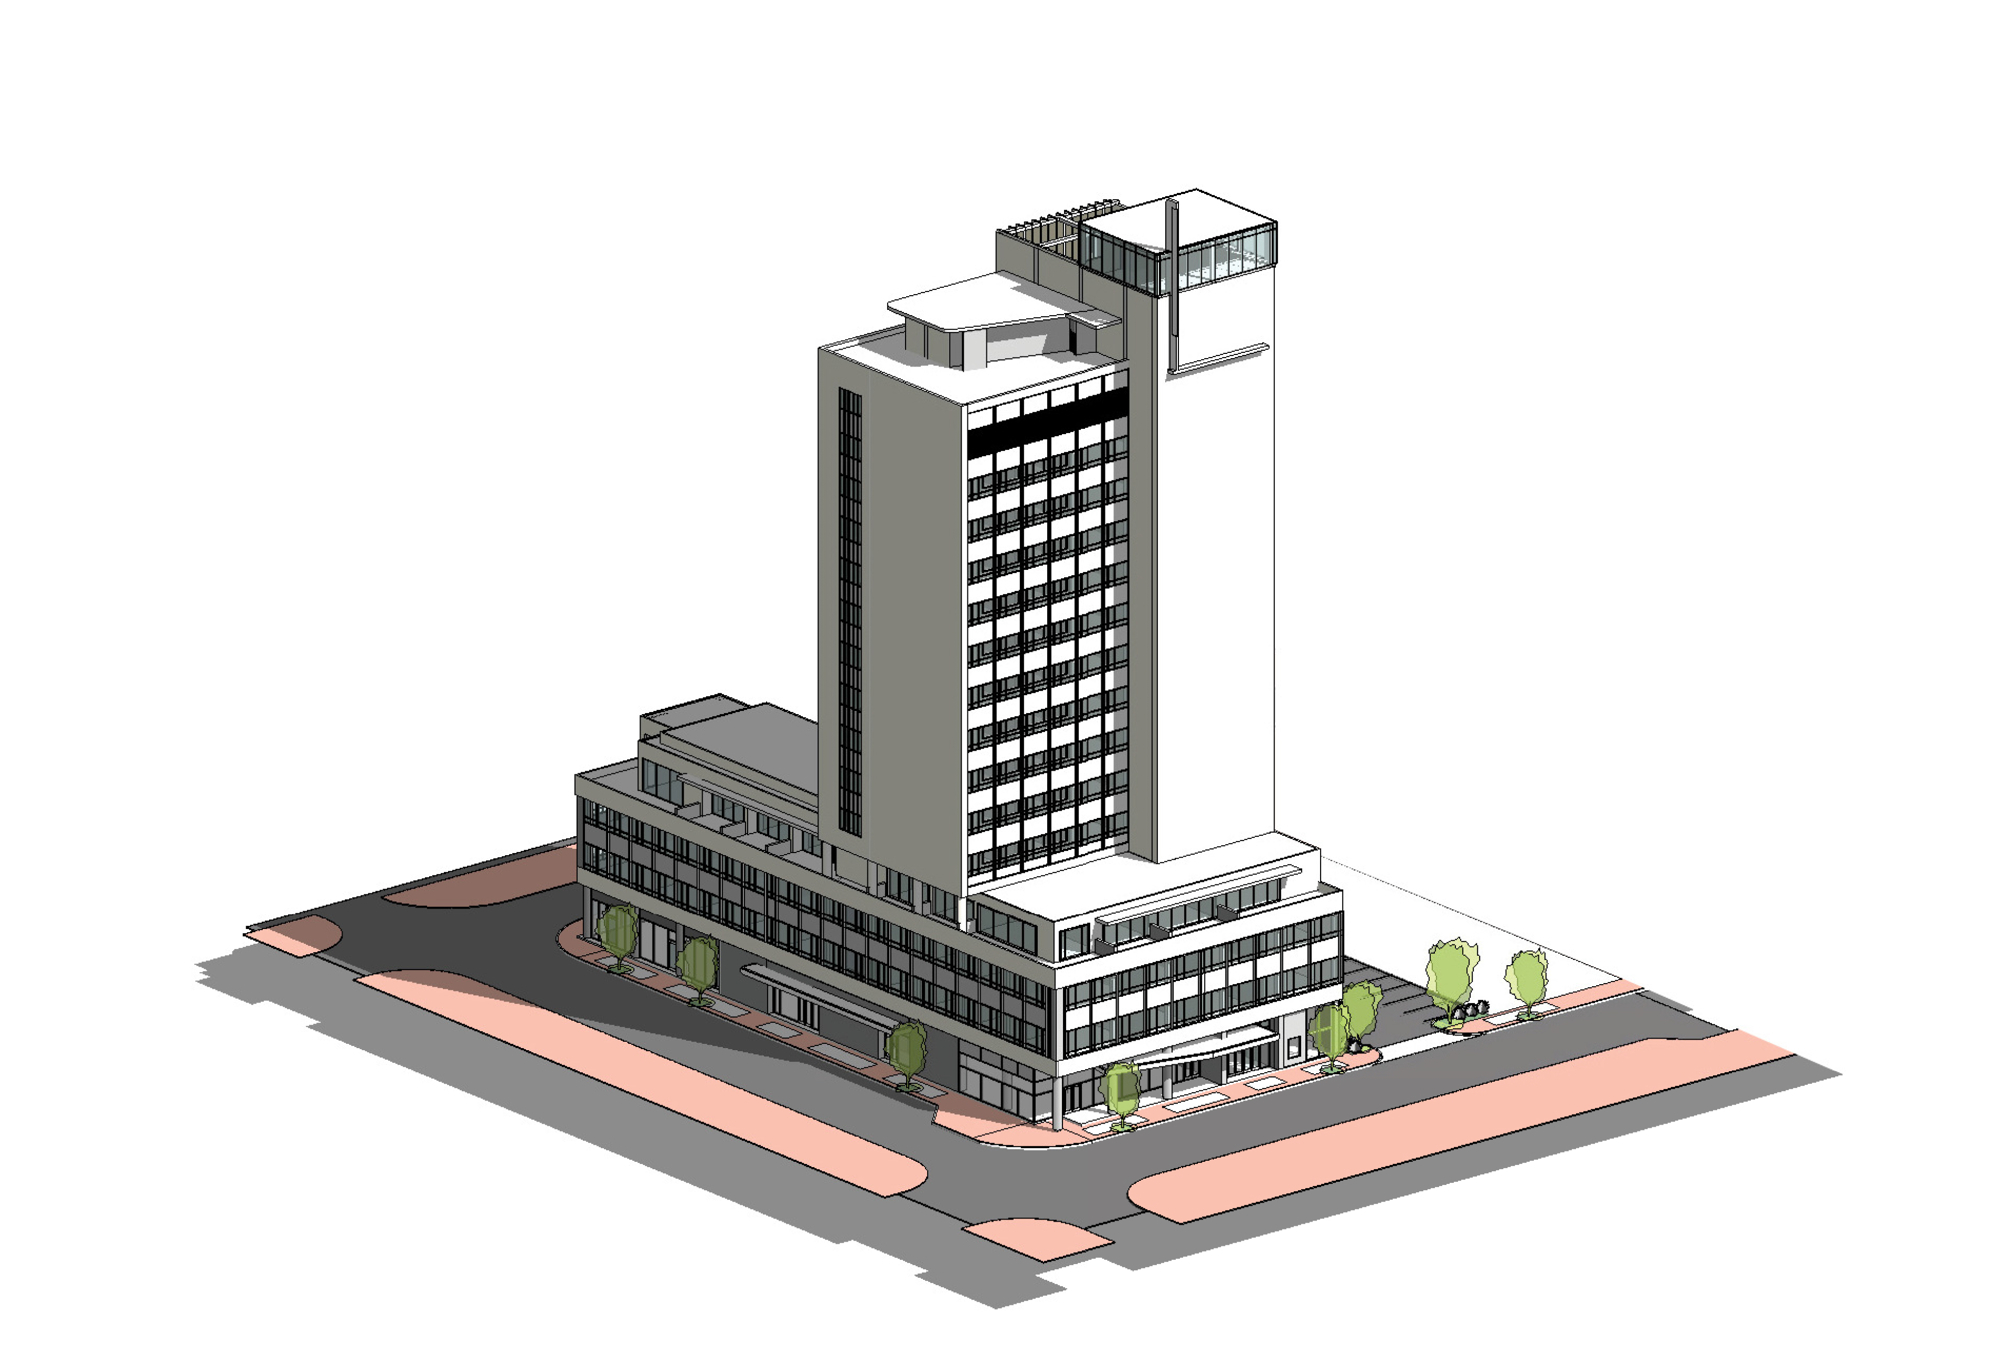 An artist's rendering of the Independent Life Insurance Building.